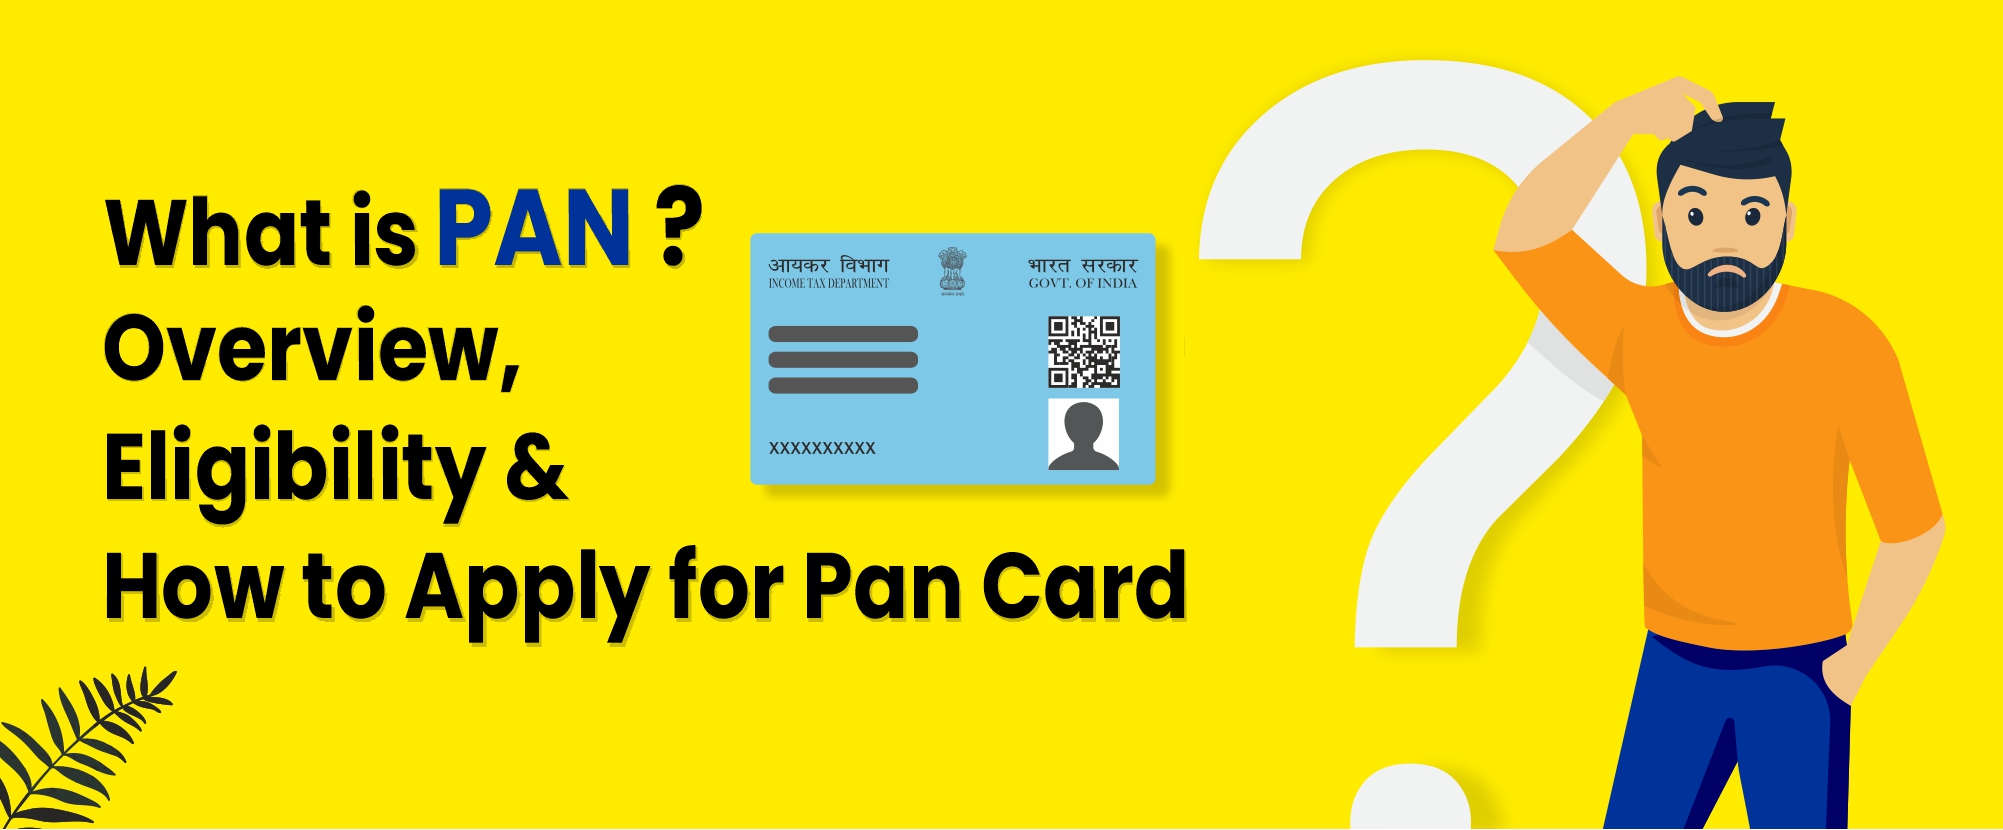 What is PAN, Overview, Eligibility and How to Apply for PAN Card